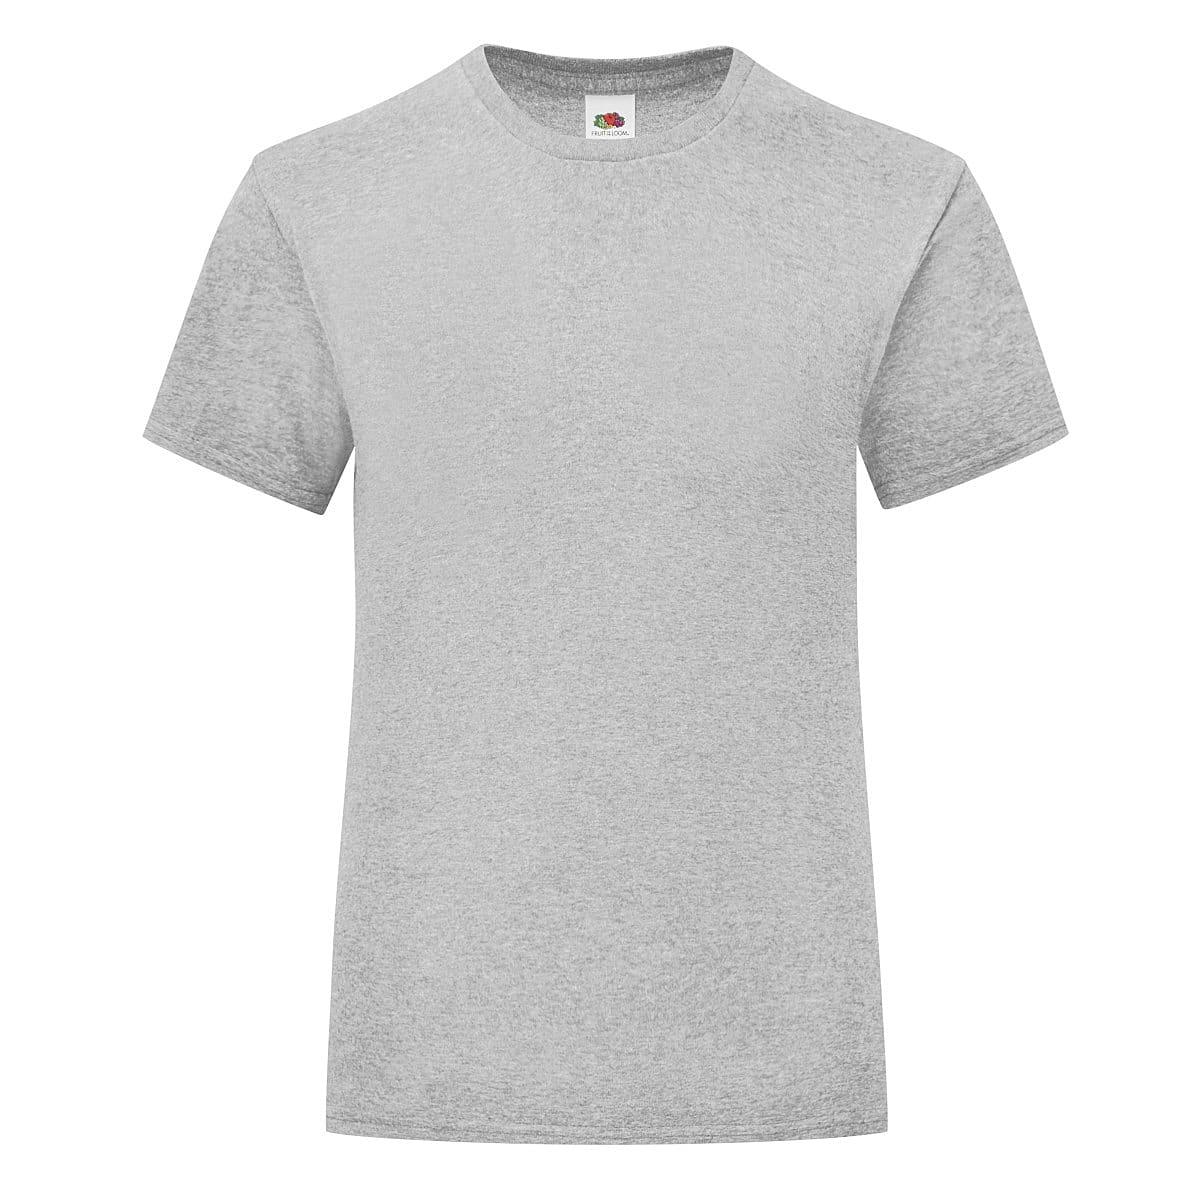 Fruit Of The Loom Girls Iconic T-Shirt in Heather Grey (Product Code: 61025)